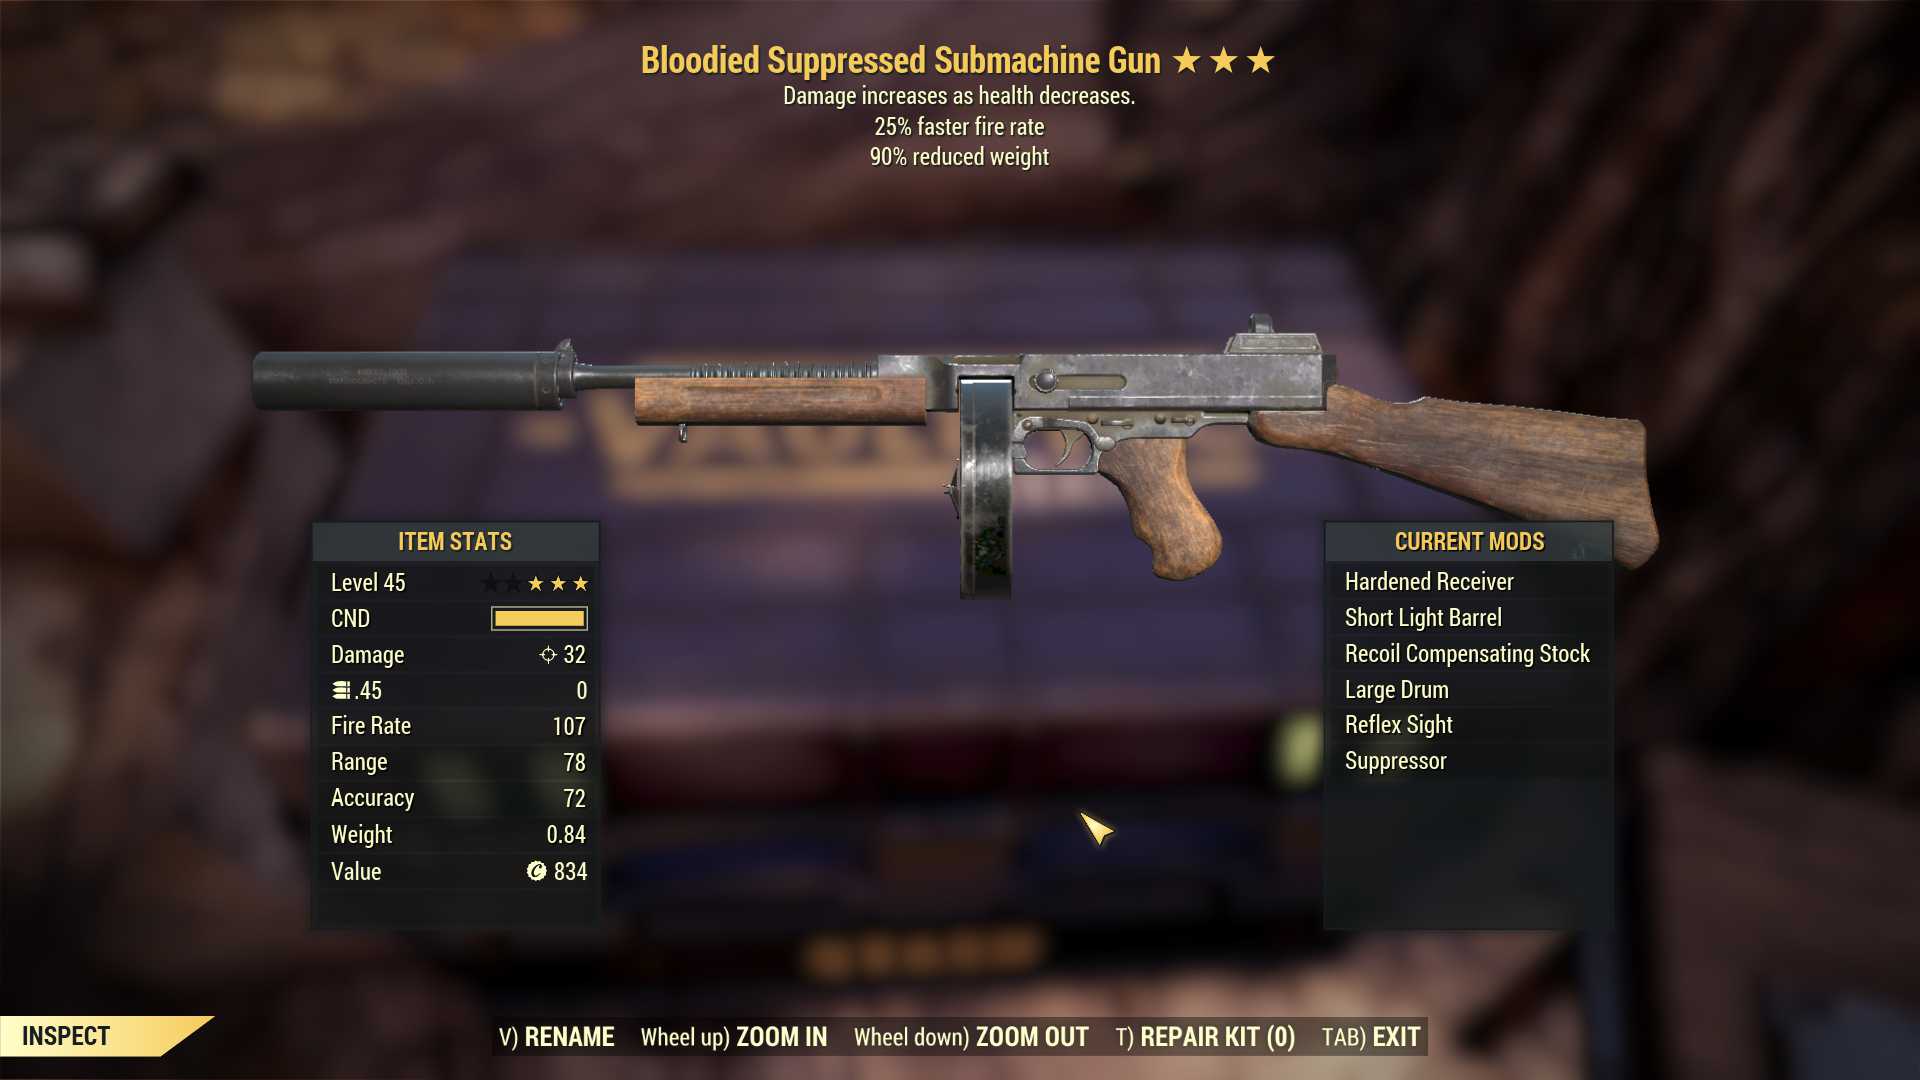 Bloodied Submachine Gun (25% faster fire rate, 90% reduced weight)